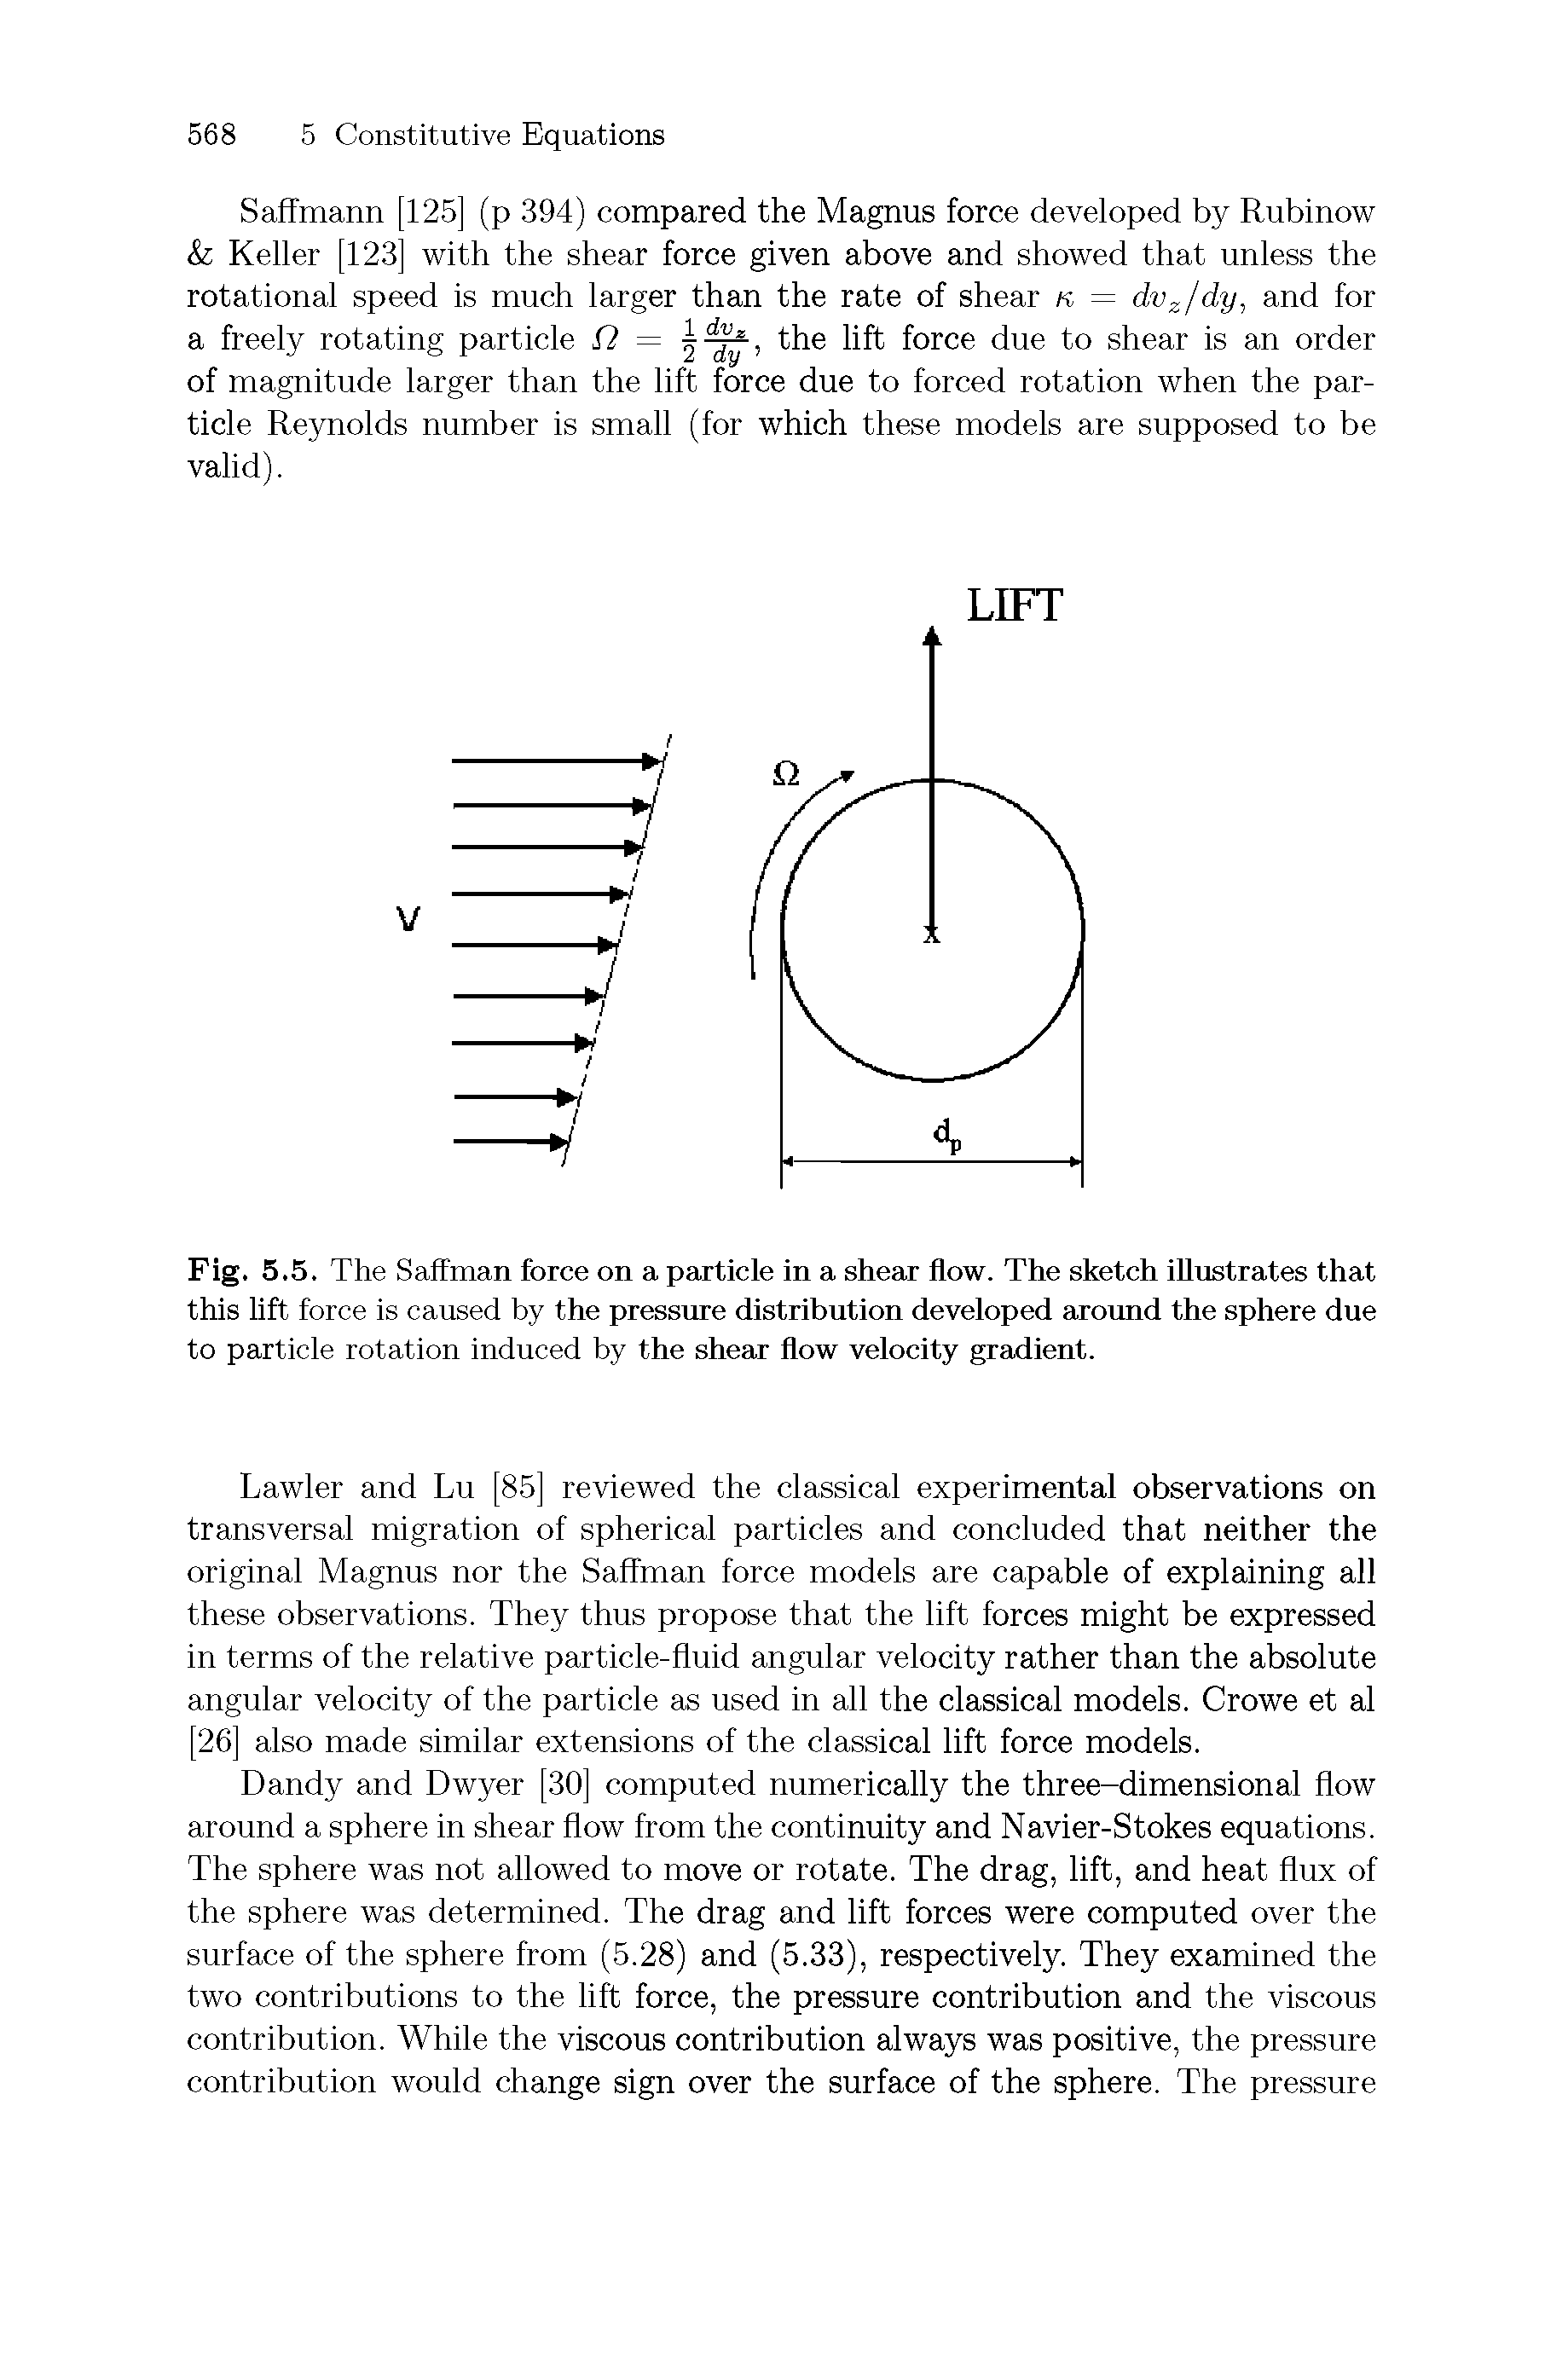 Fig. 5.5. The Saffman force on a particle in a shear flow. The sketch illustrates that this lift force is caused by the pressure distribution developed around the sphere due to particle rotation induced by the shear flow velocity gradient.